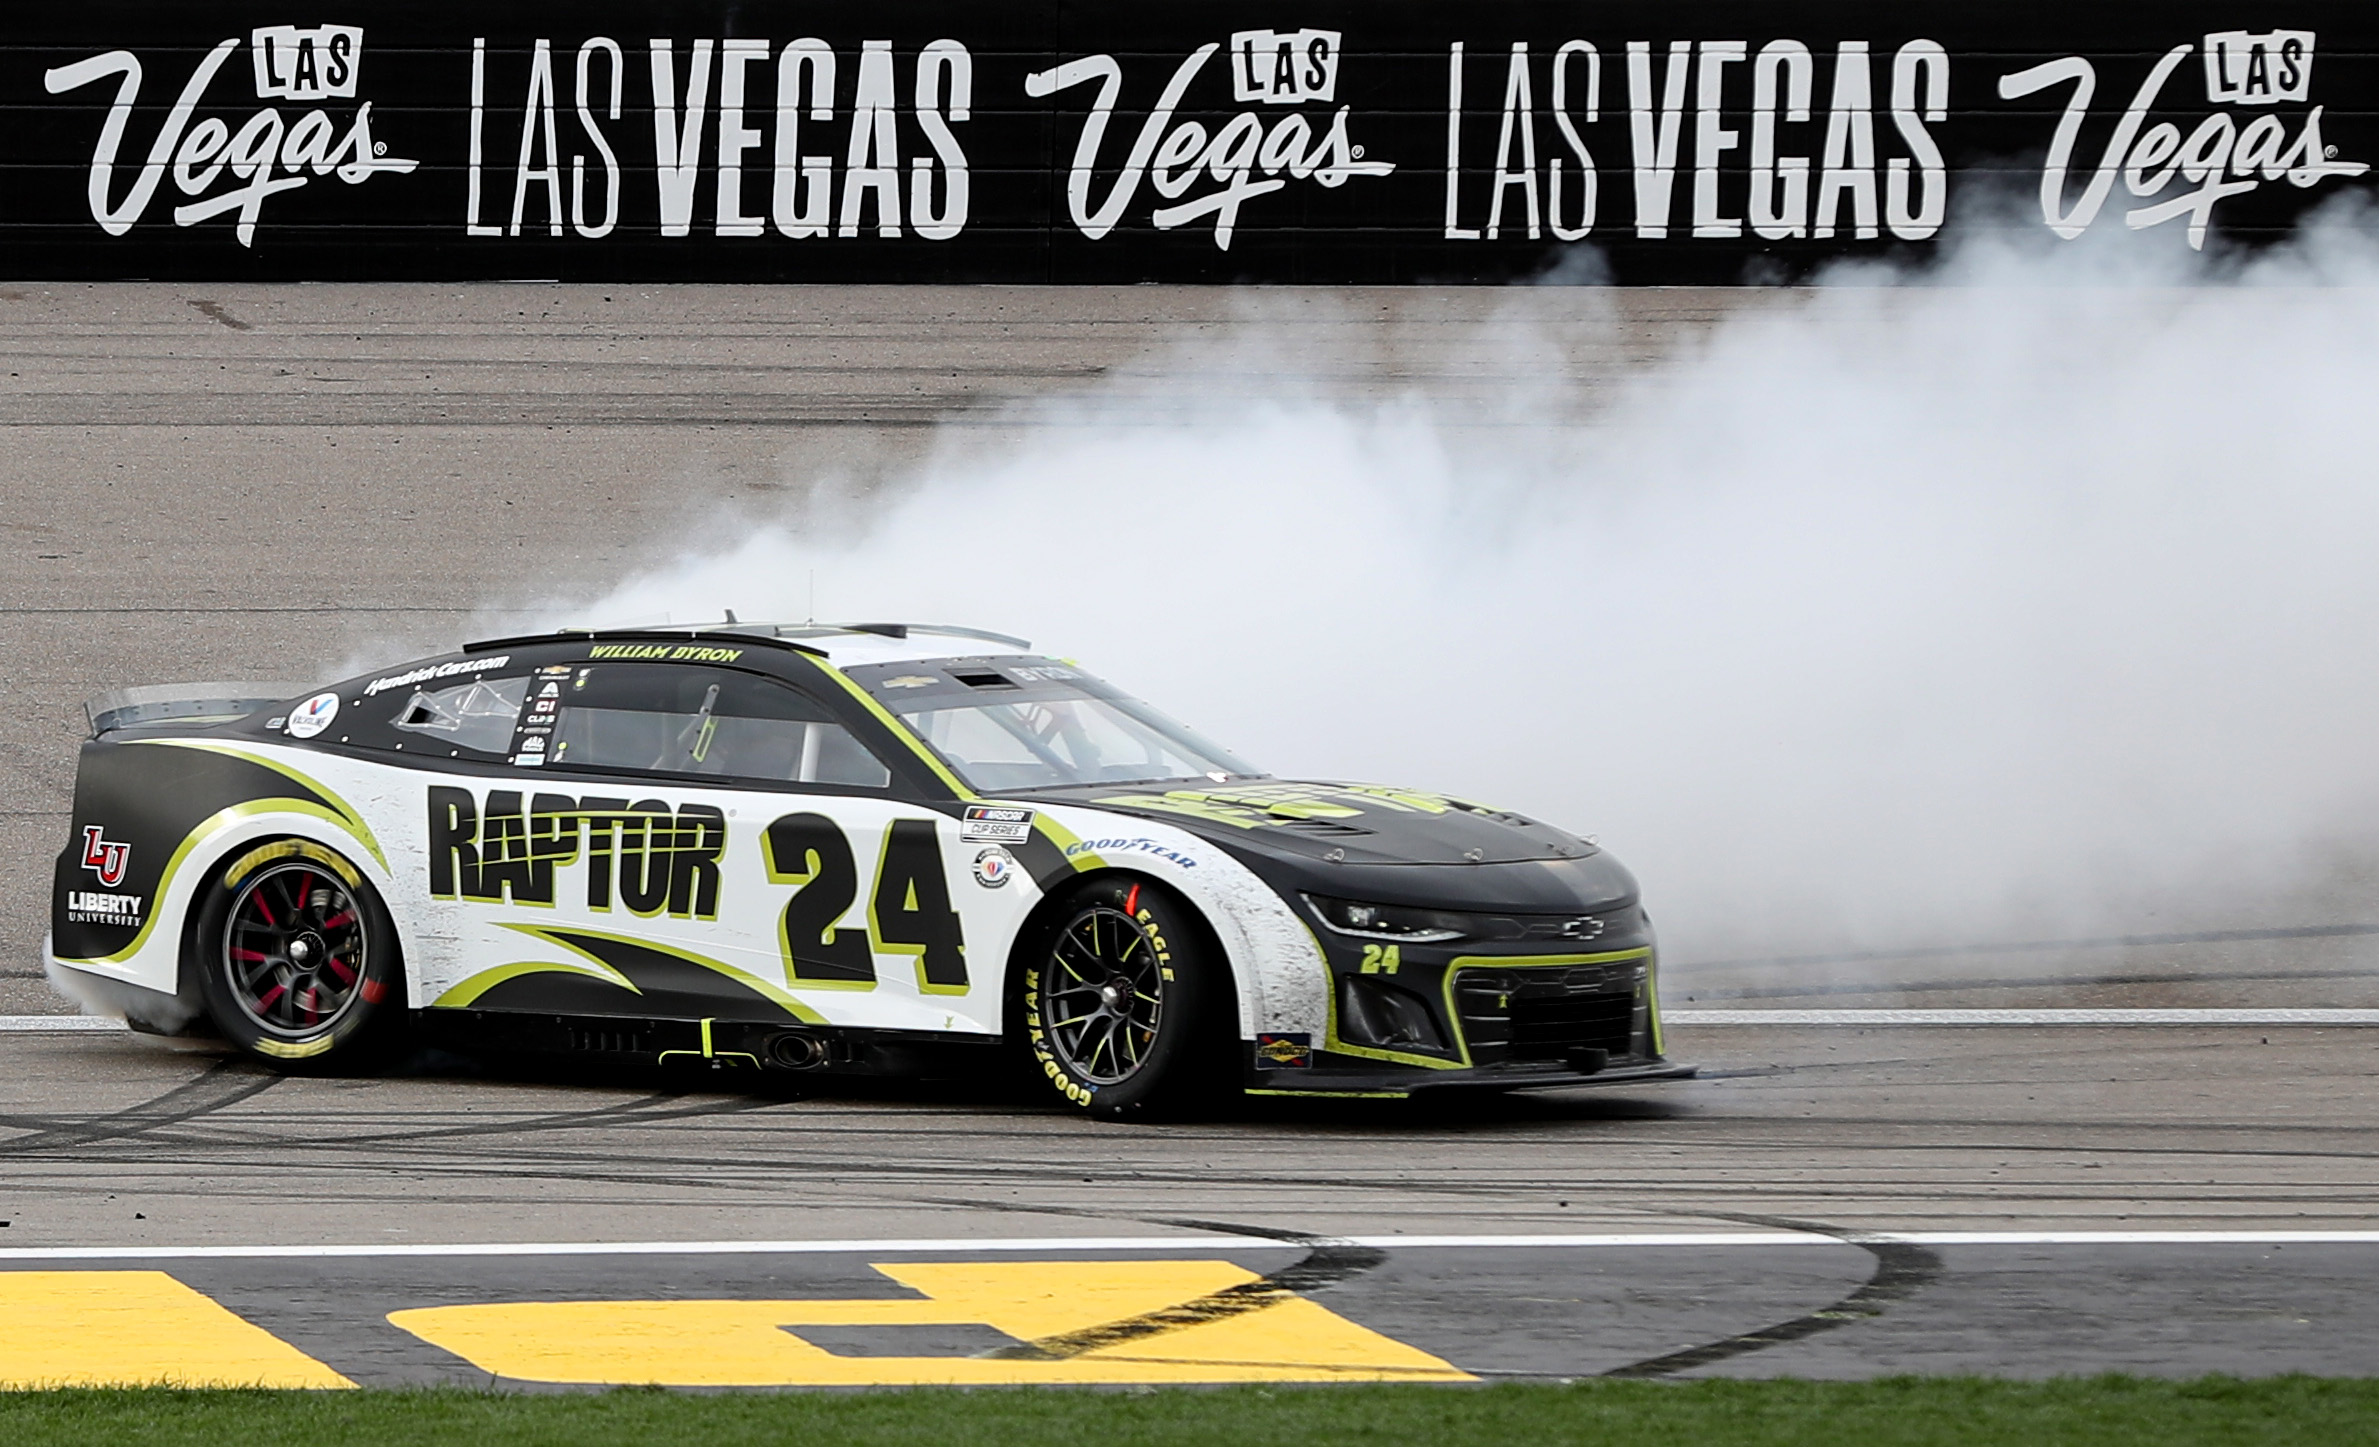 William Byron Caps Off Vegas Domination in Overtime